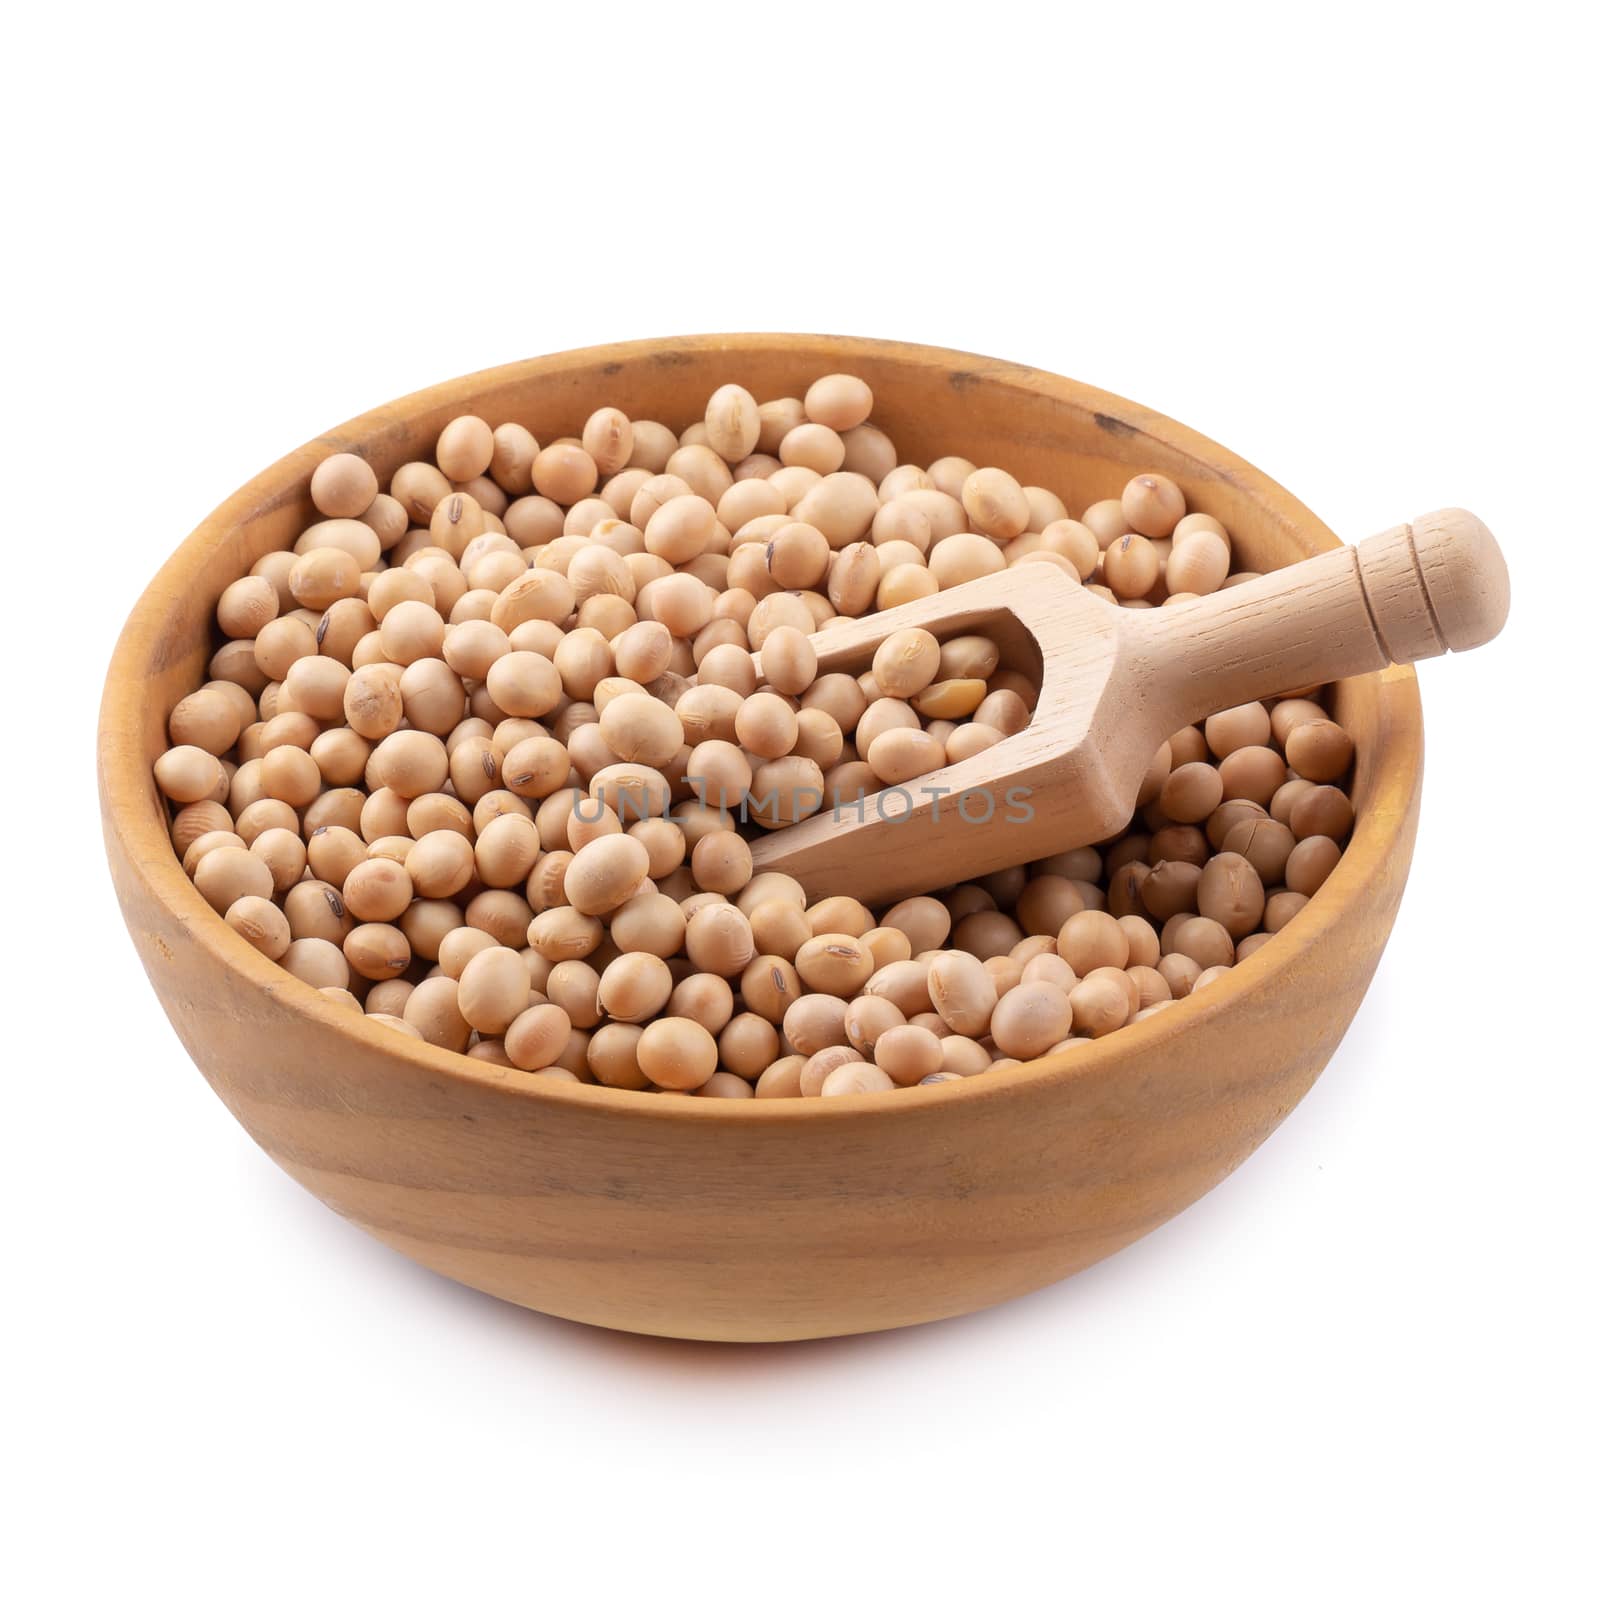 Soybean in a wooden bowl isolated on white background.